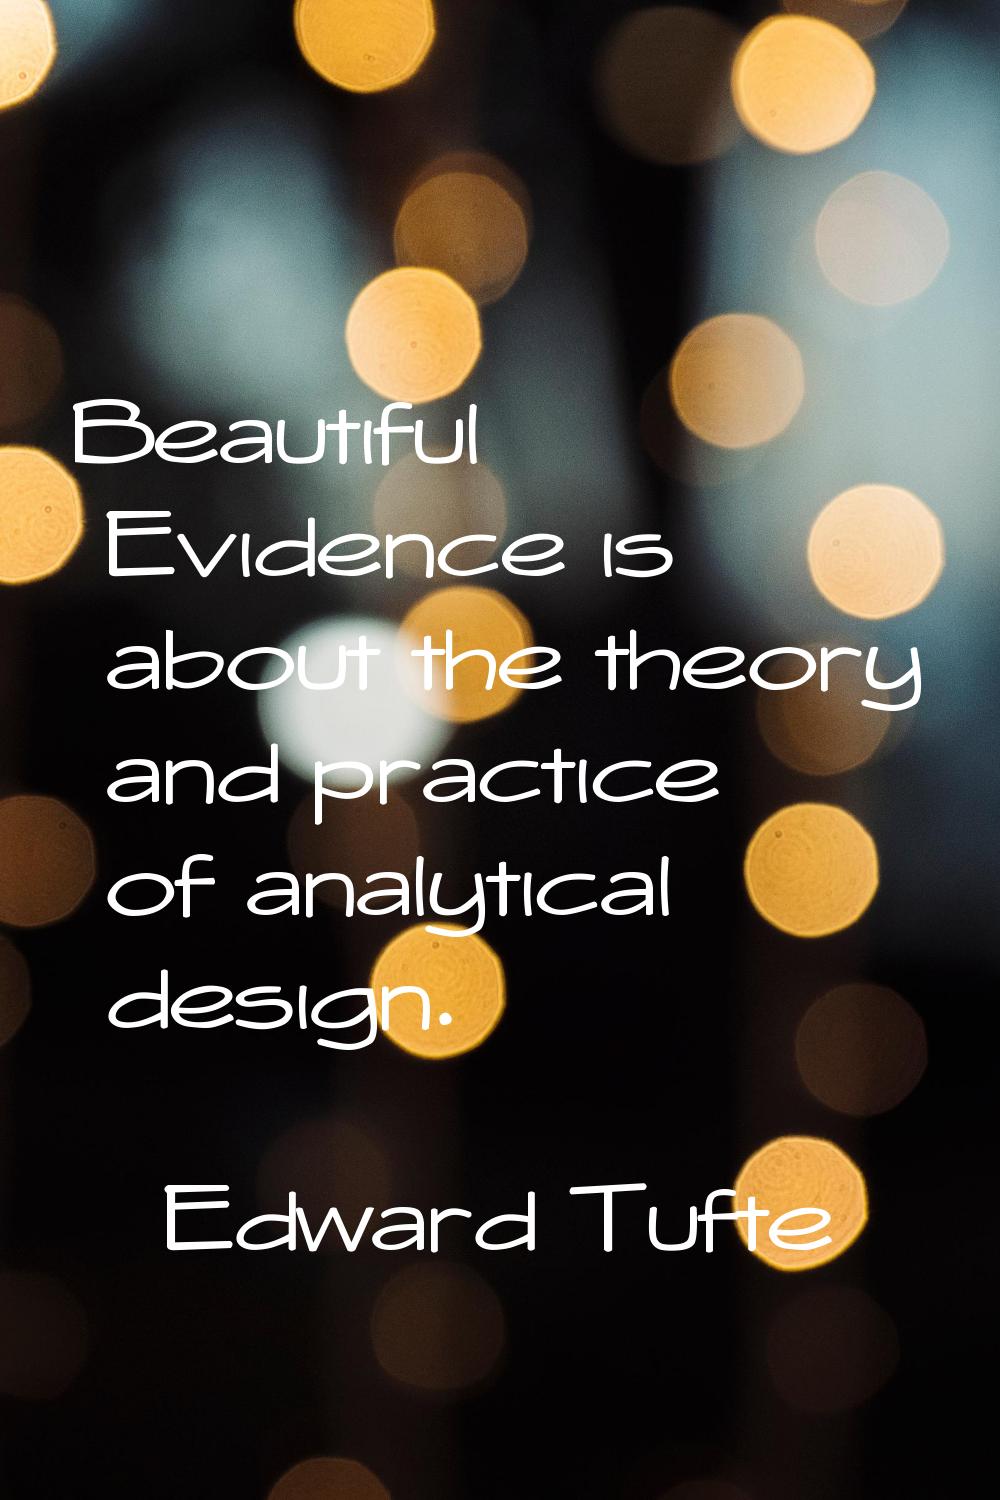 Beautiful Evidence is about the theory and practice of analytical design.